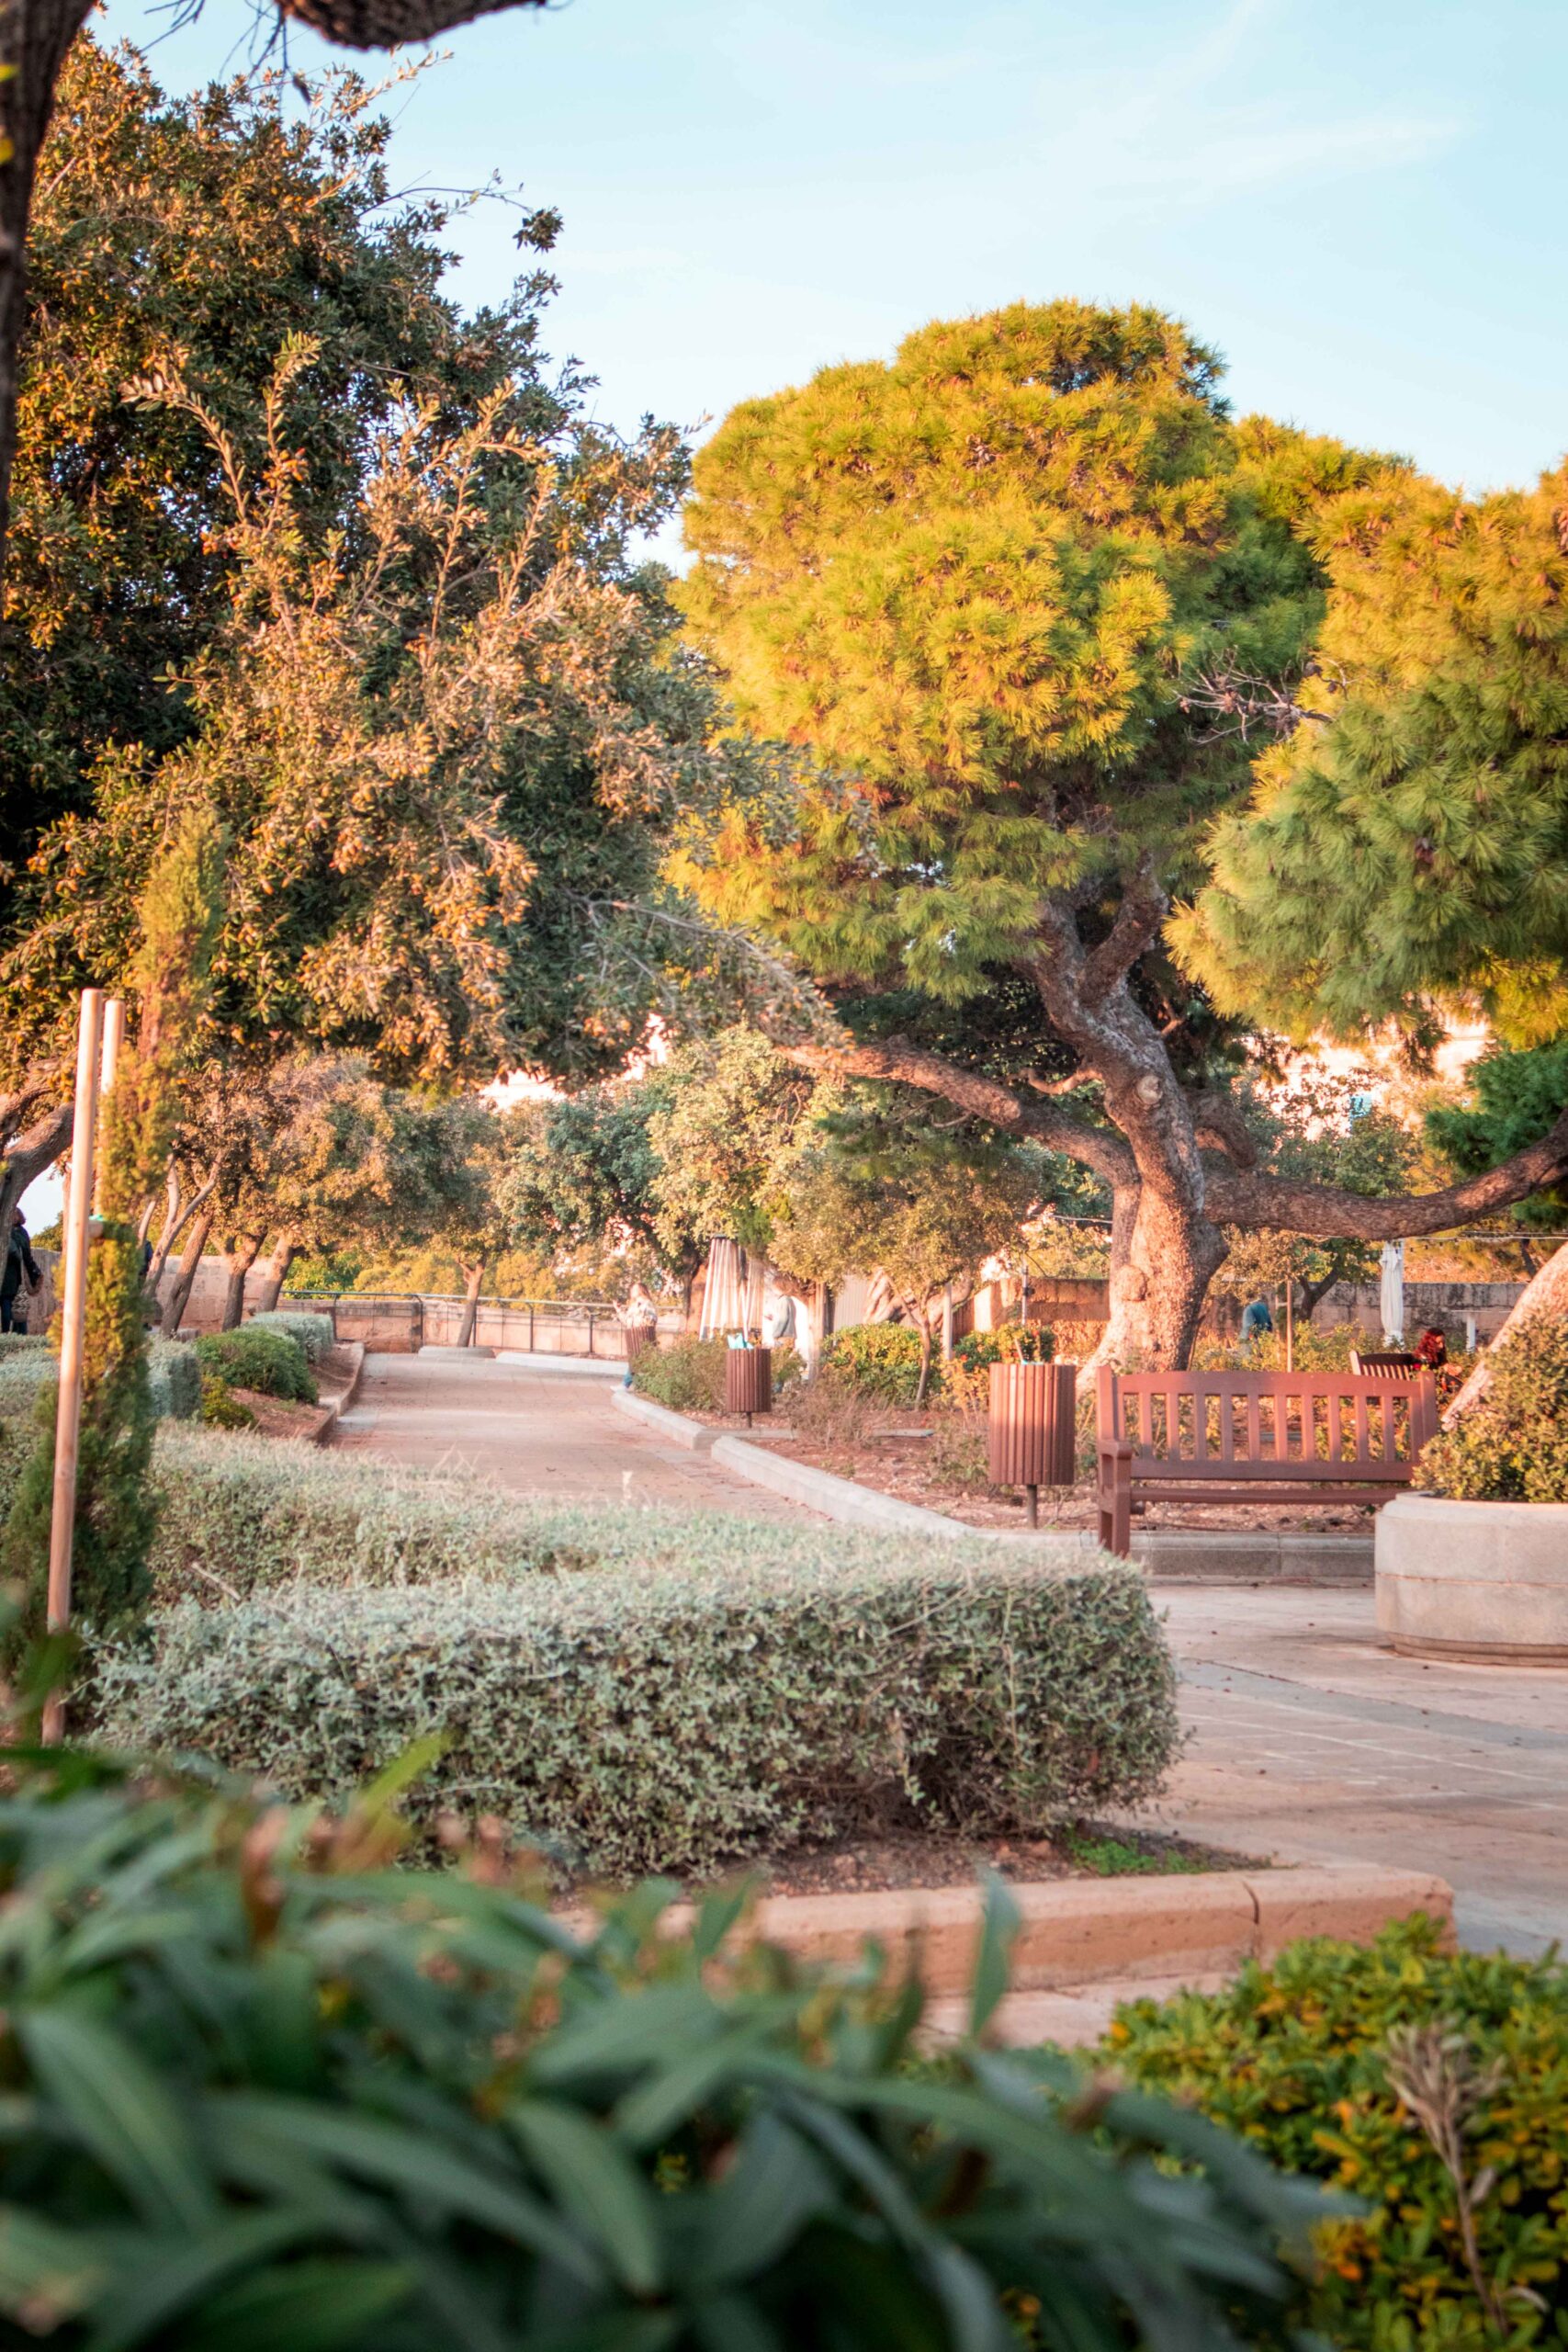 Alley with trees and vegetation in the Hastings Garden in Valletta, Malta